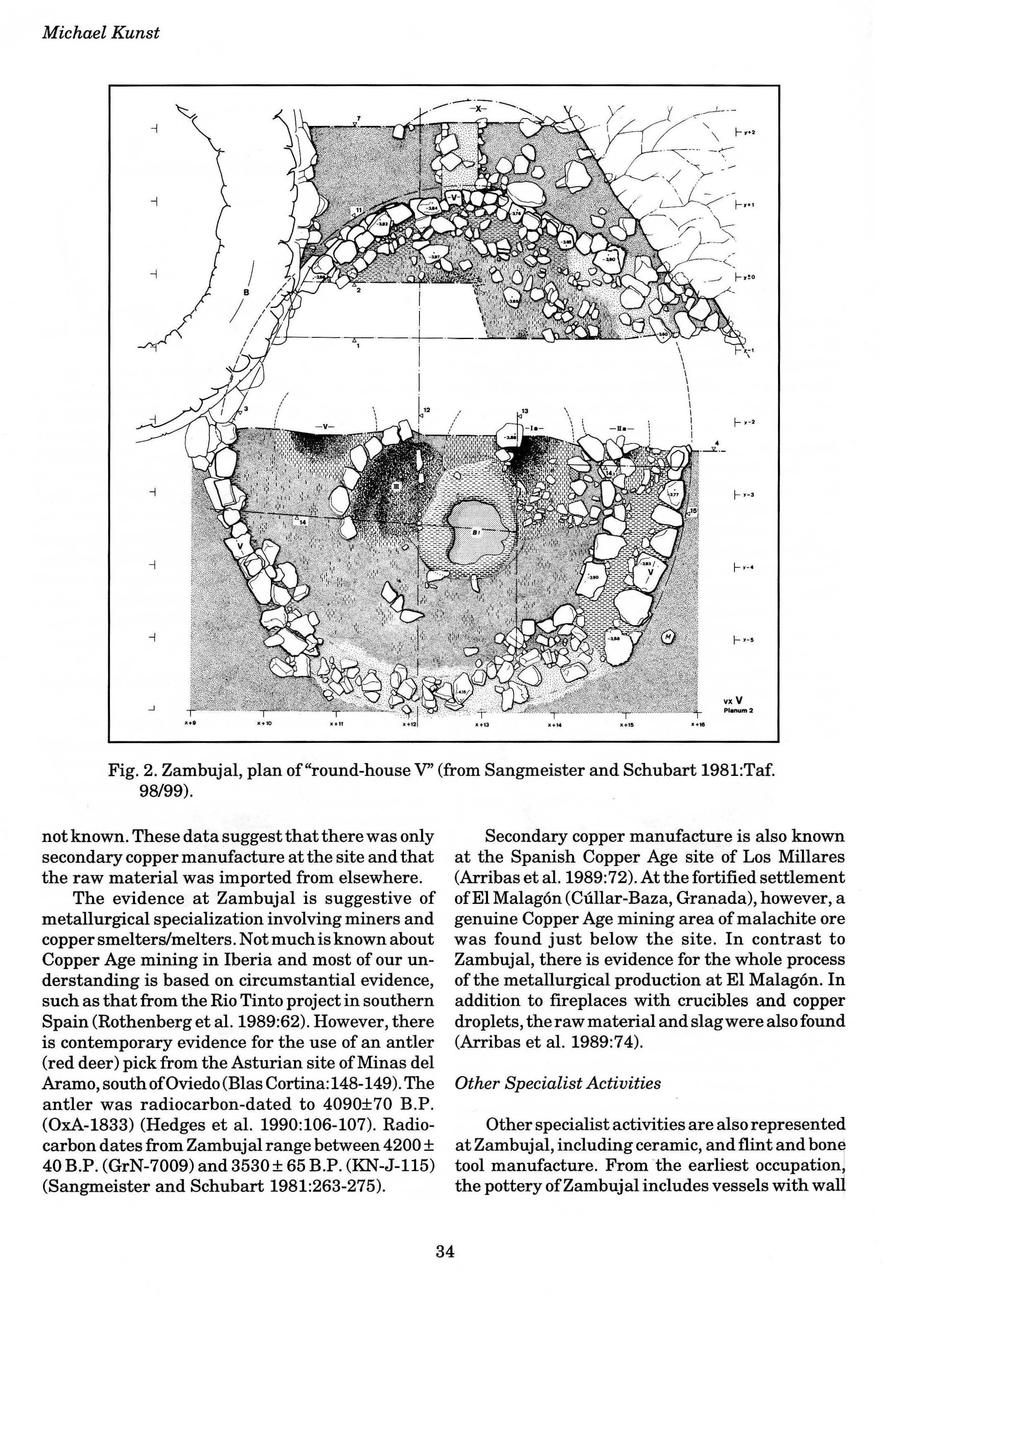 Michael Kunst Fig. 2. Zambujal, plan of"round-house V" (from Sangmeister and Schubart 1981:Taf. 98/99). not known.